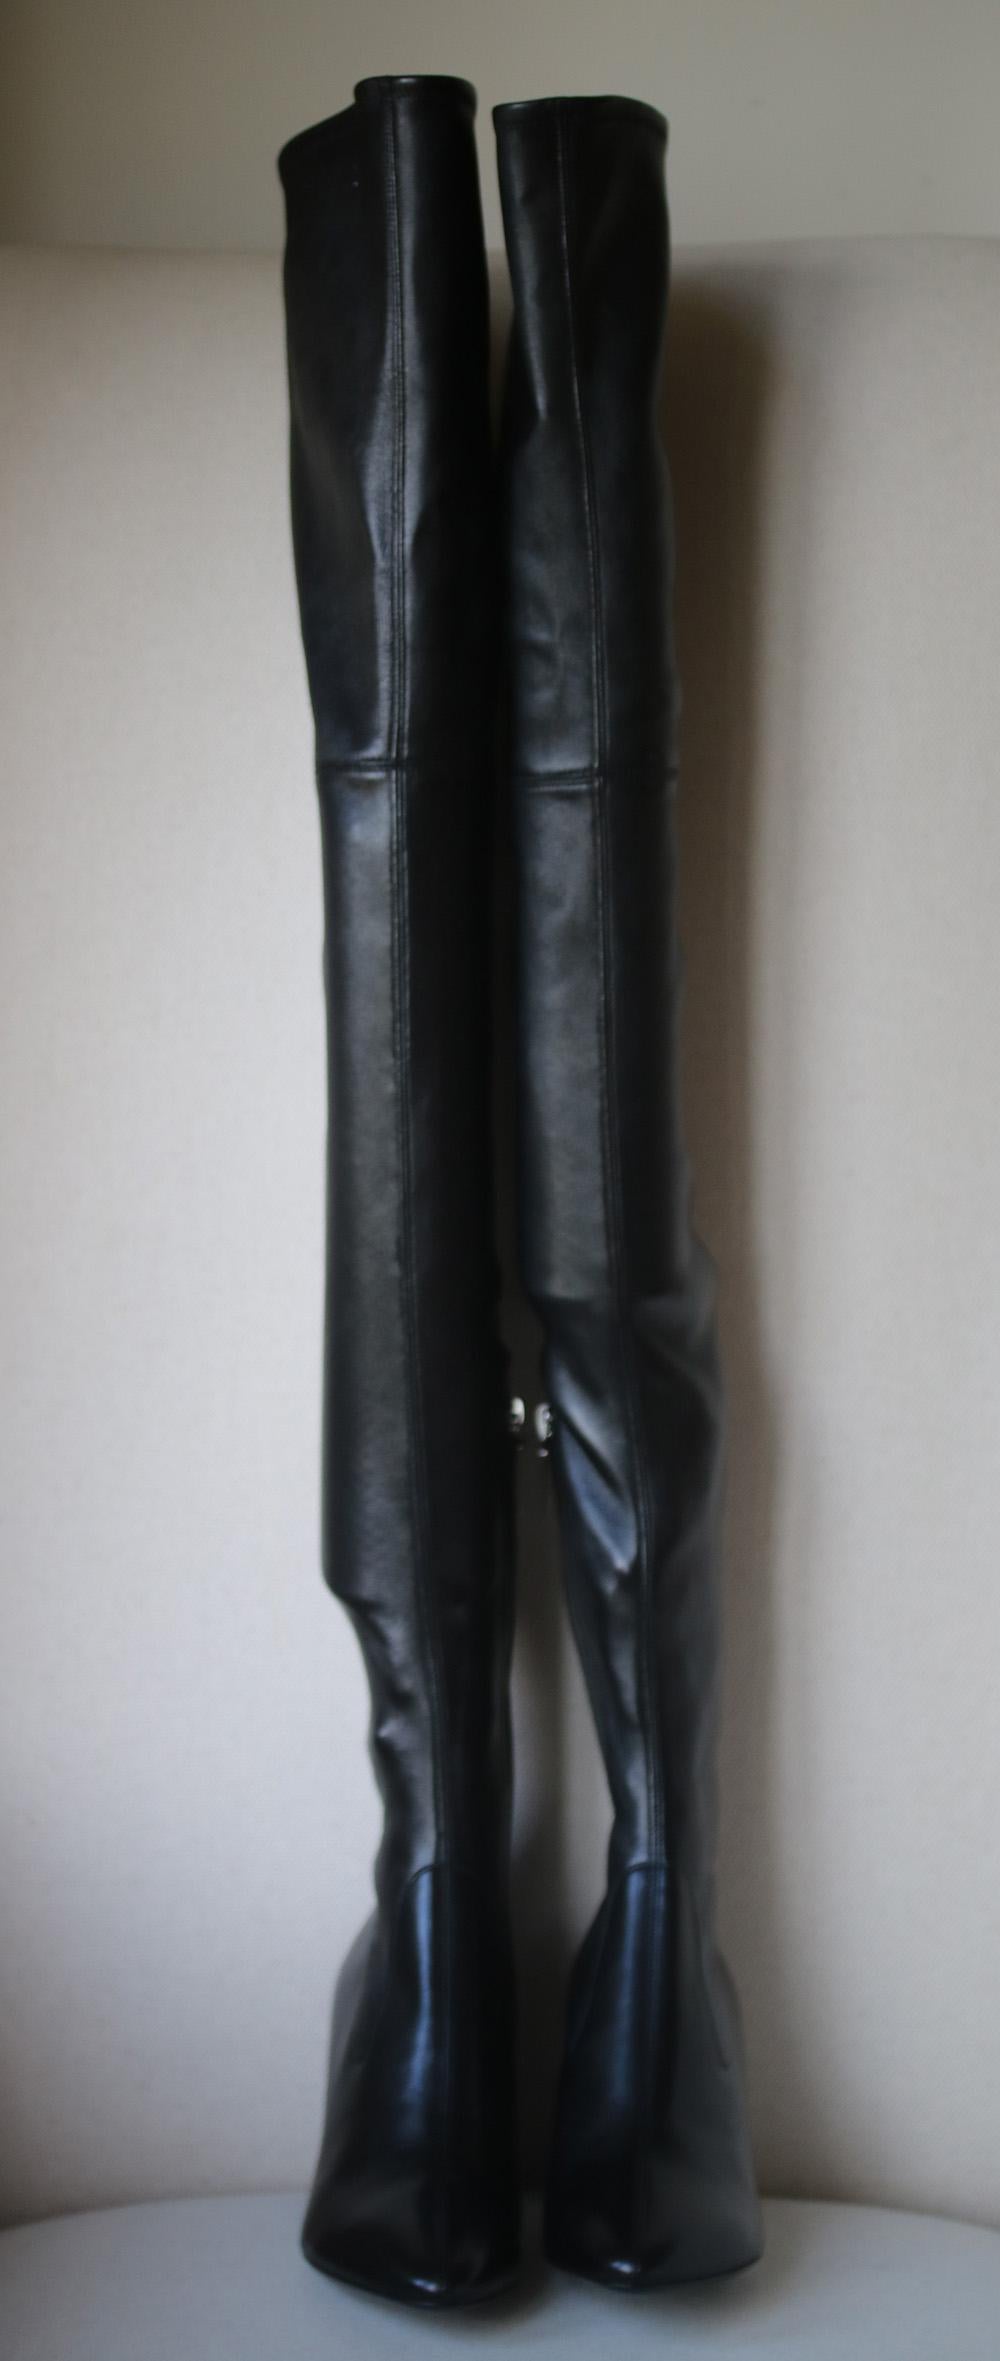 Thigh-high boots have been a favorite of Saint Laurent's since the original designer's era - a photograph of Yves in the '60s shows his friend and muse Betty Catroux wearing a pair similar to this one. Crafted from soft black leather, they have a